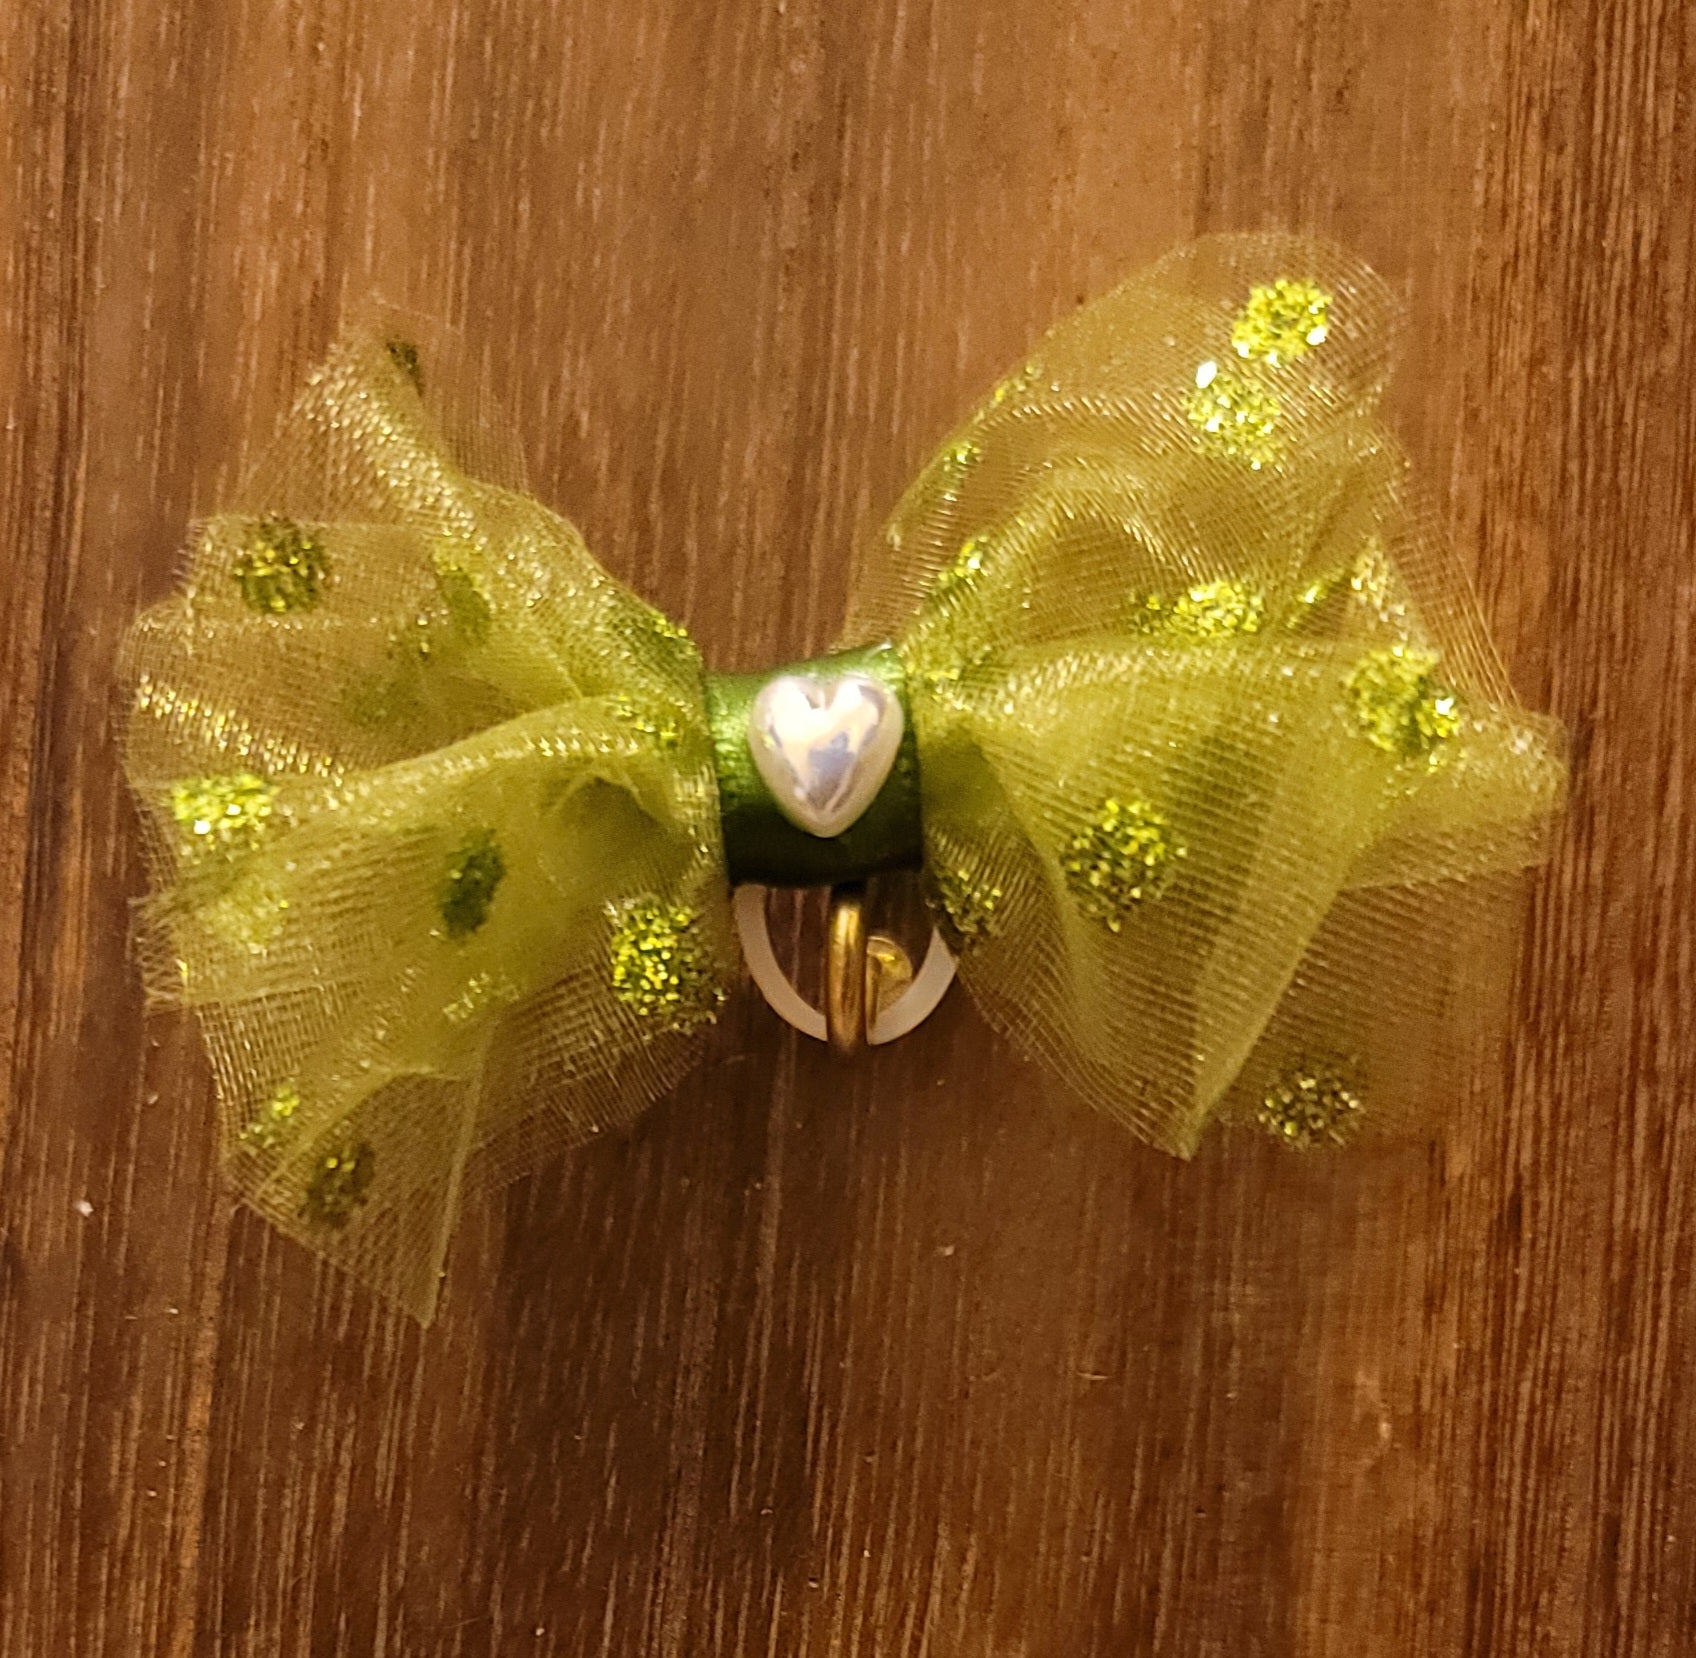 Wizard ribbon Stripes of yellow and black printed on 1.5 yellow gold satin